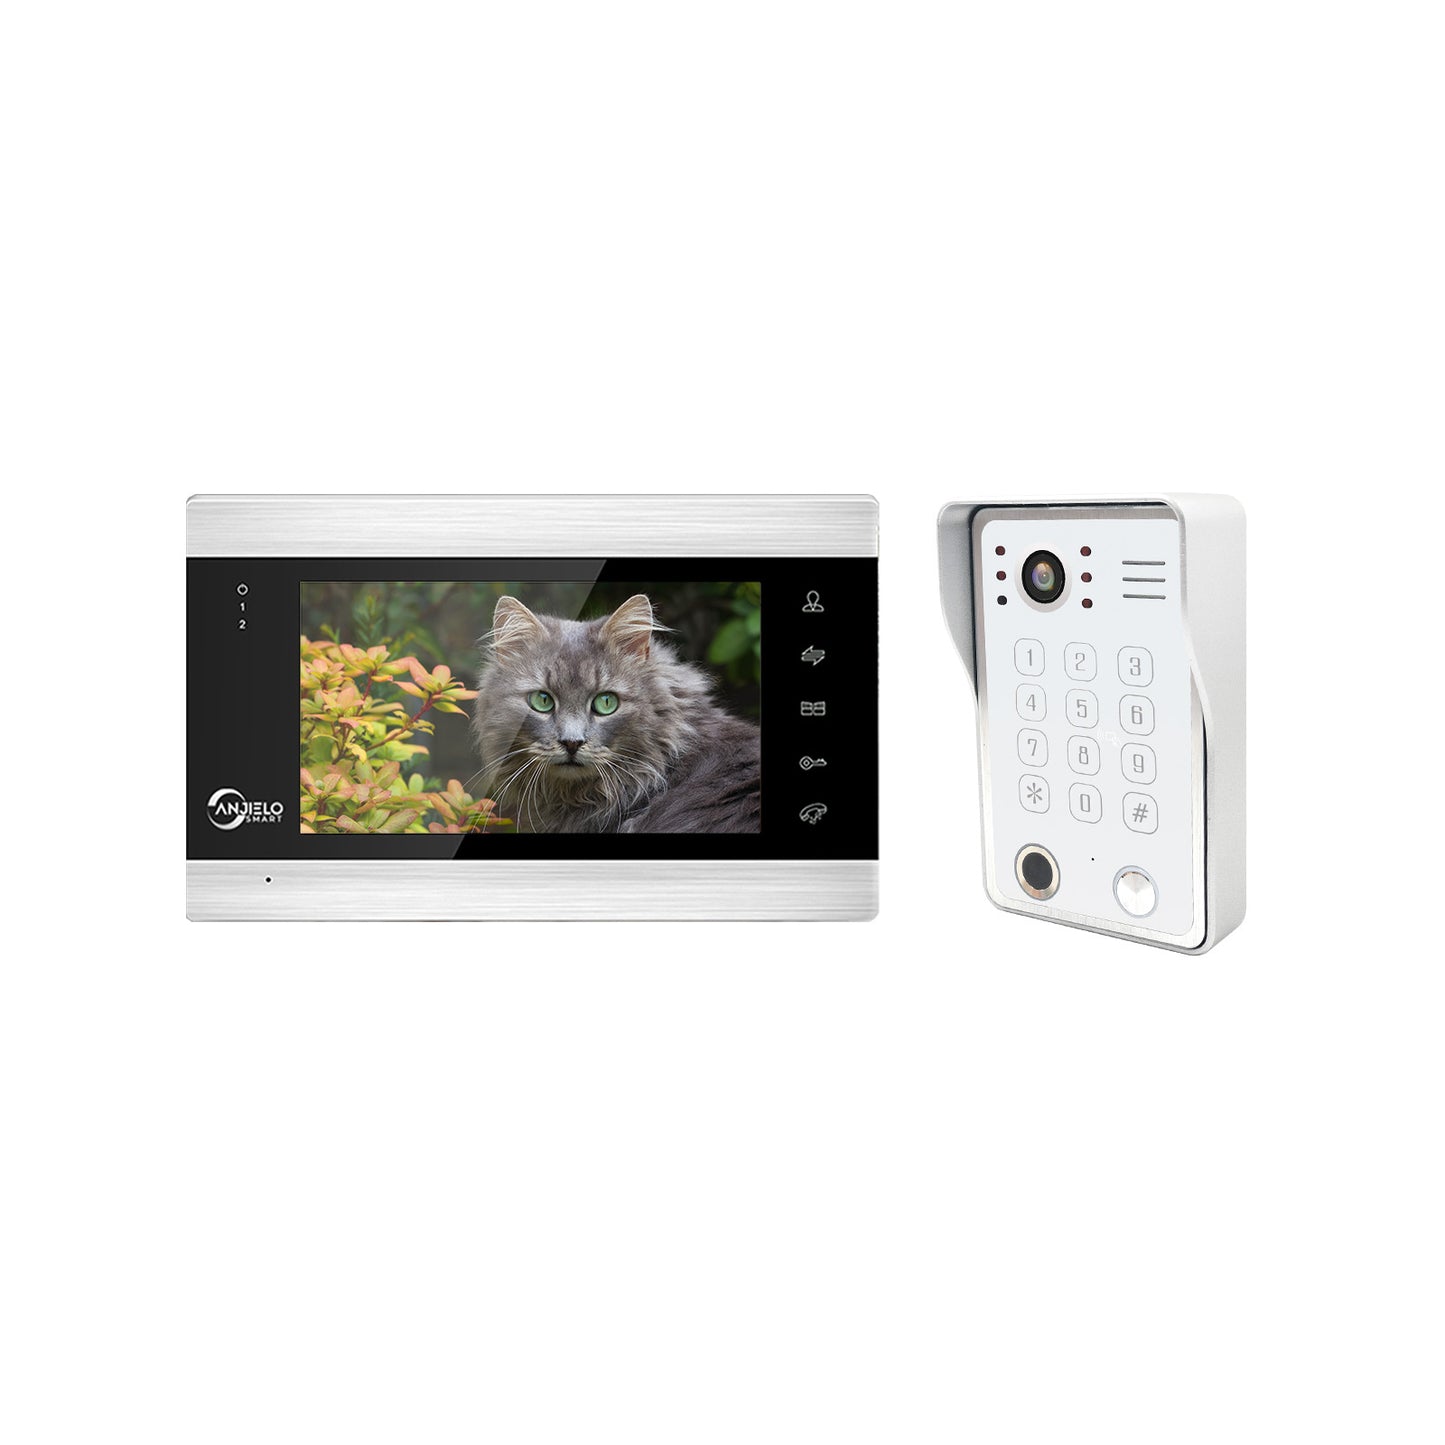 7 inch Touch Button screen Video Door Phone Rfid Card Access Control System Doorbell with Fingerprint and password unlock Video Intercom System